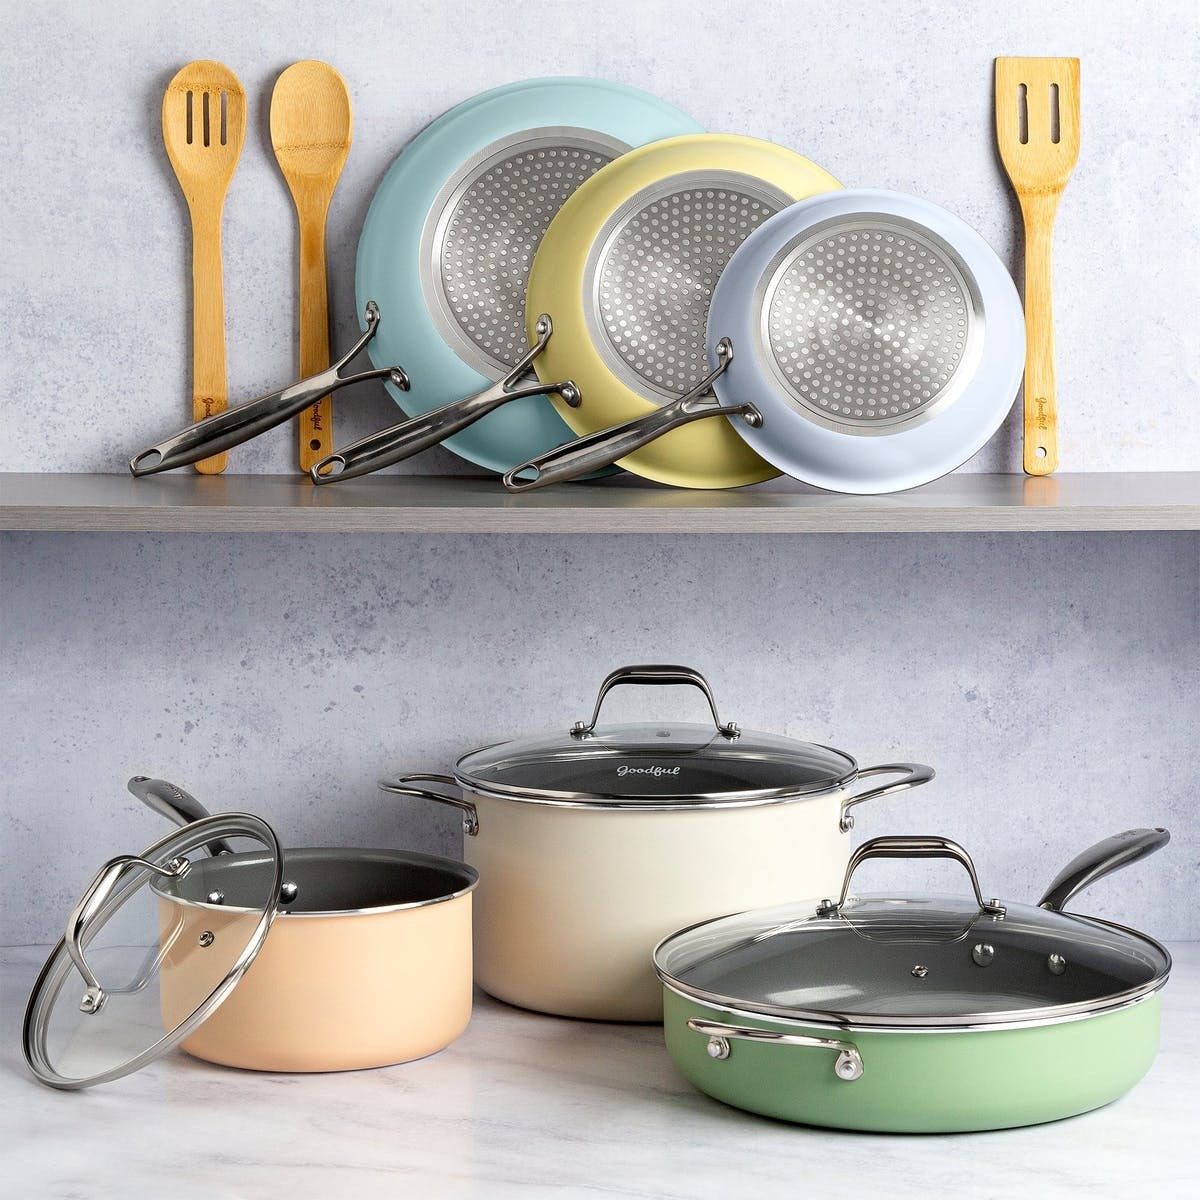 multicolored 12-piece cookware set with glass lids and wooden utansils